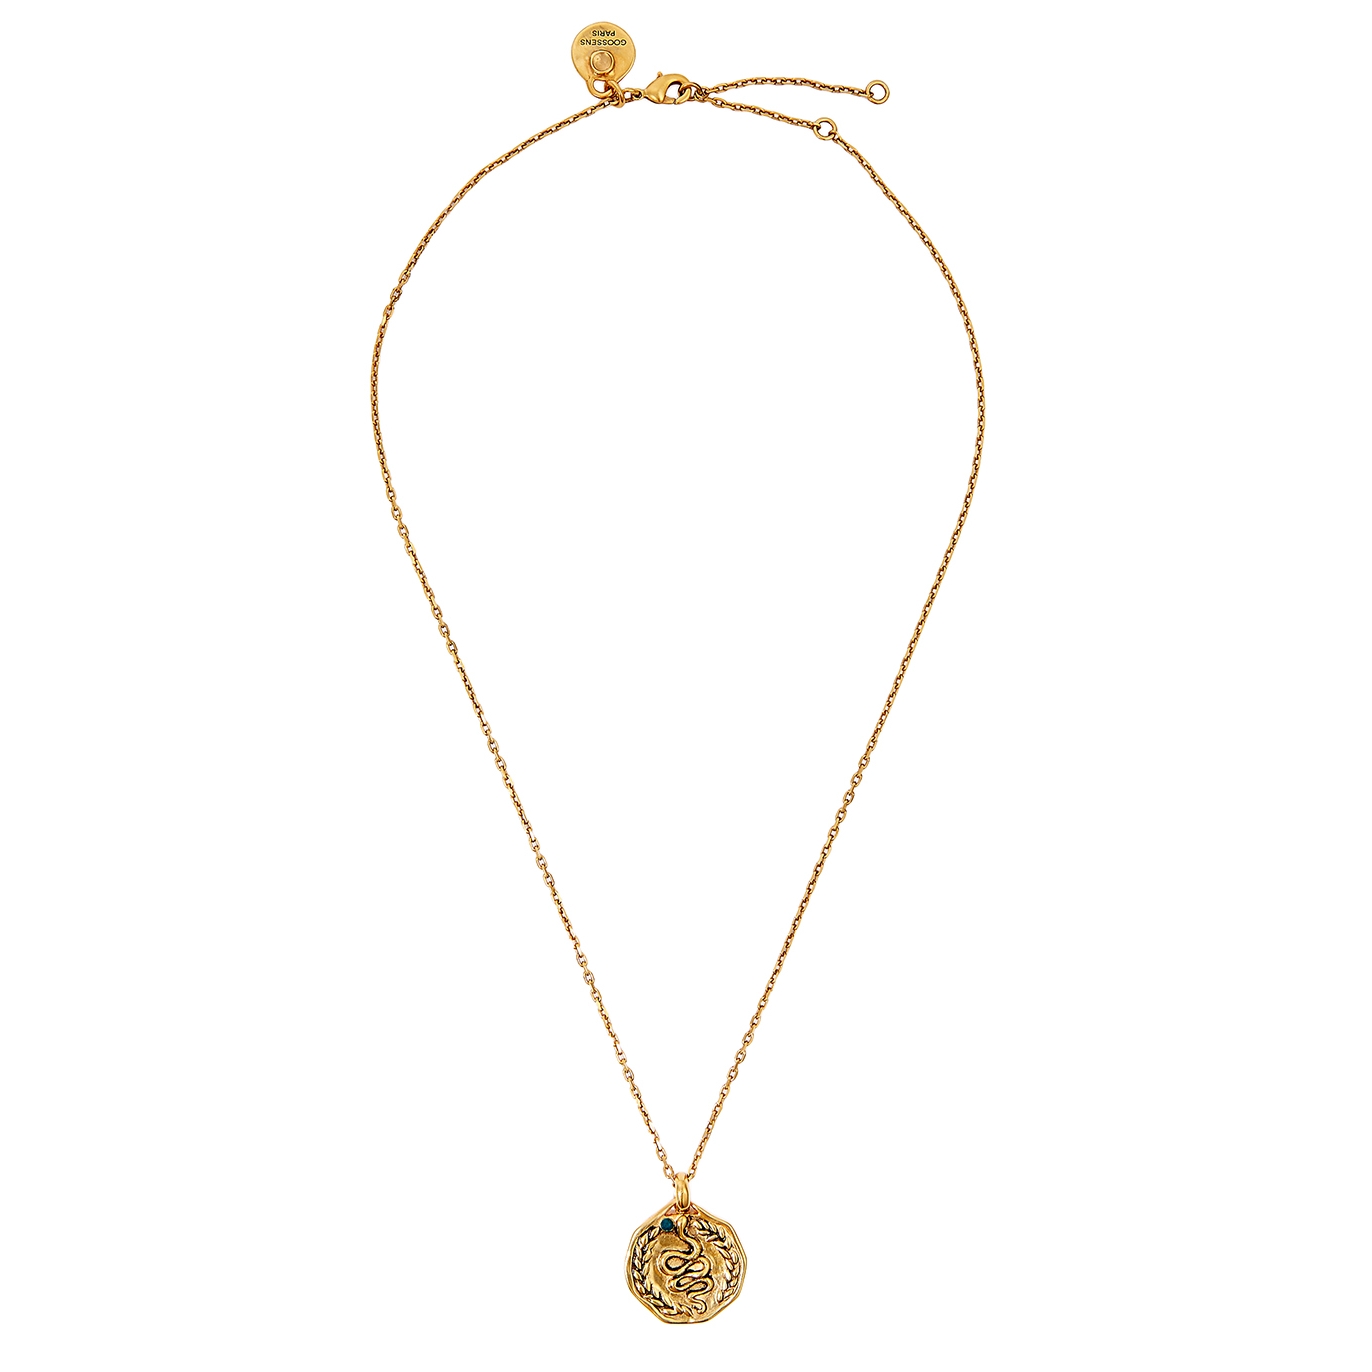 Goossens Carthage Serpent 24kt Gold-dipped Necklace - One Size